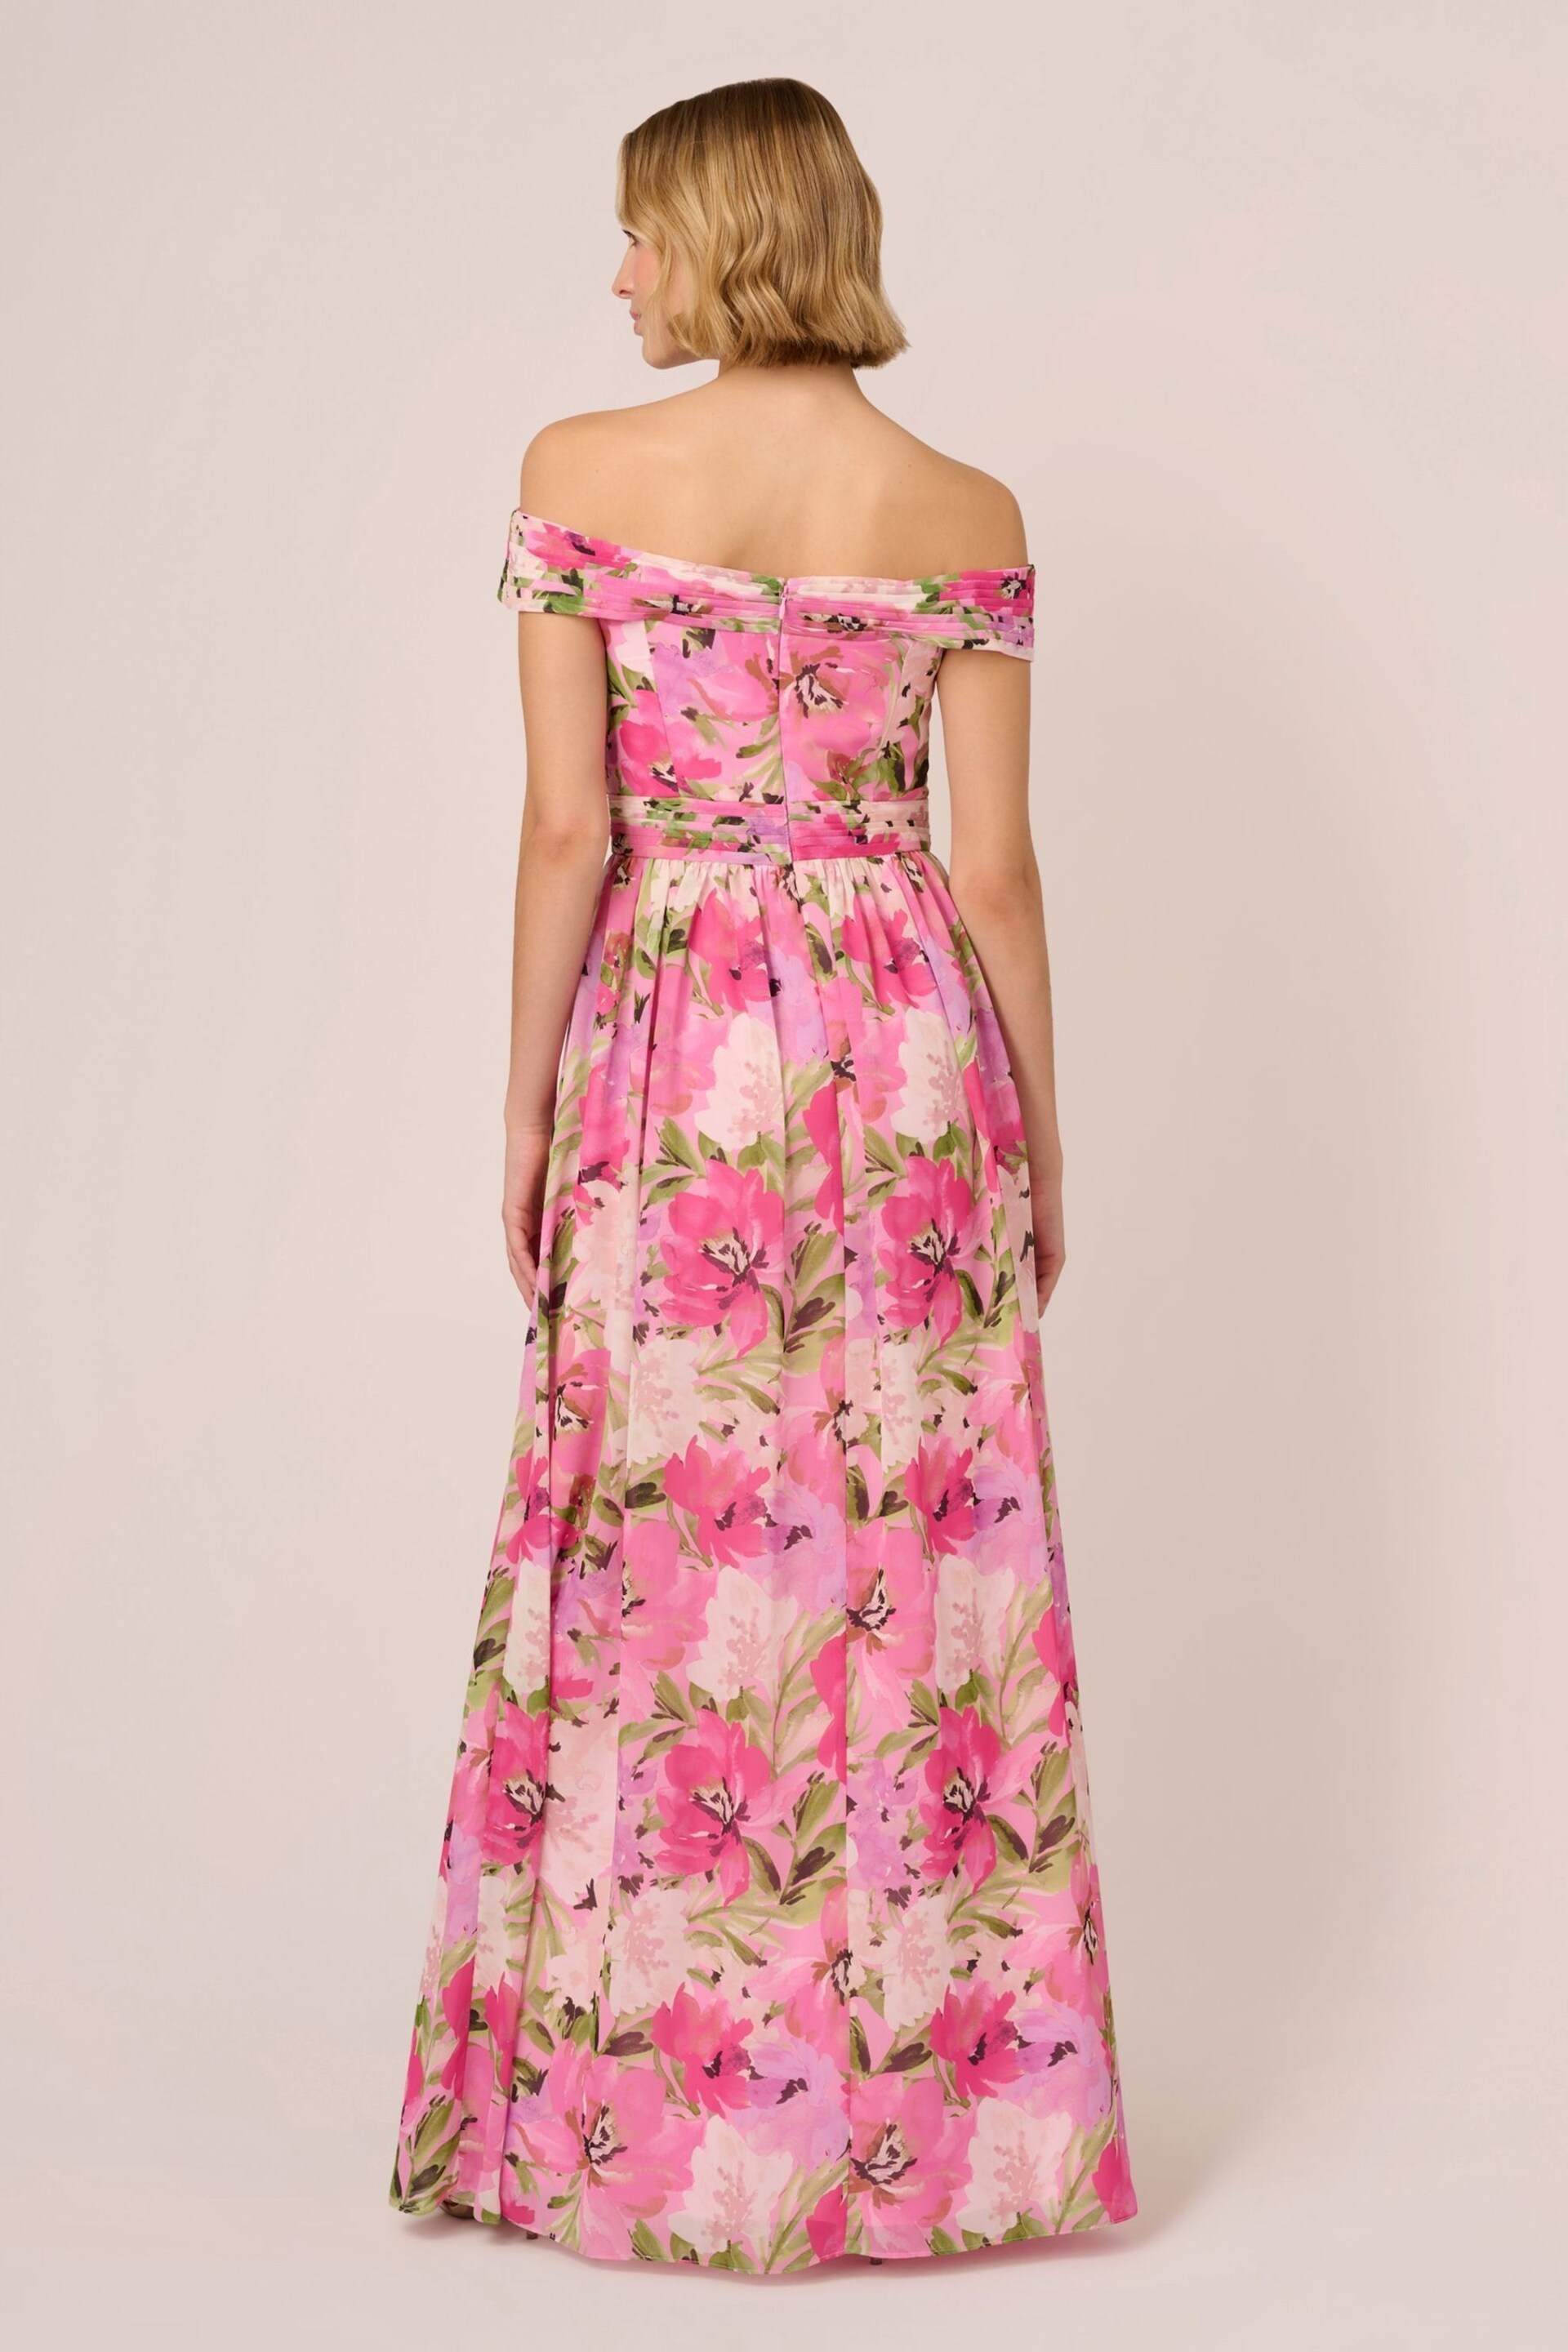 Adrianna Papell Pink Printed Off-Sholder Dress - Image 2 of 7